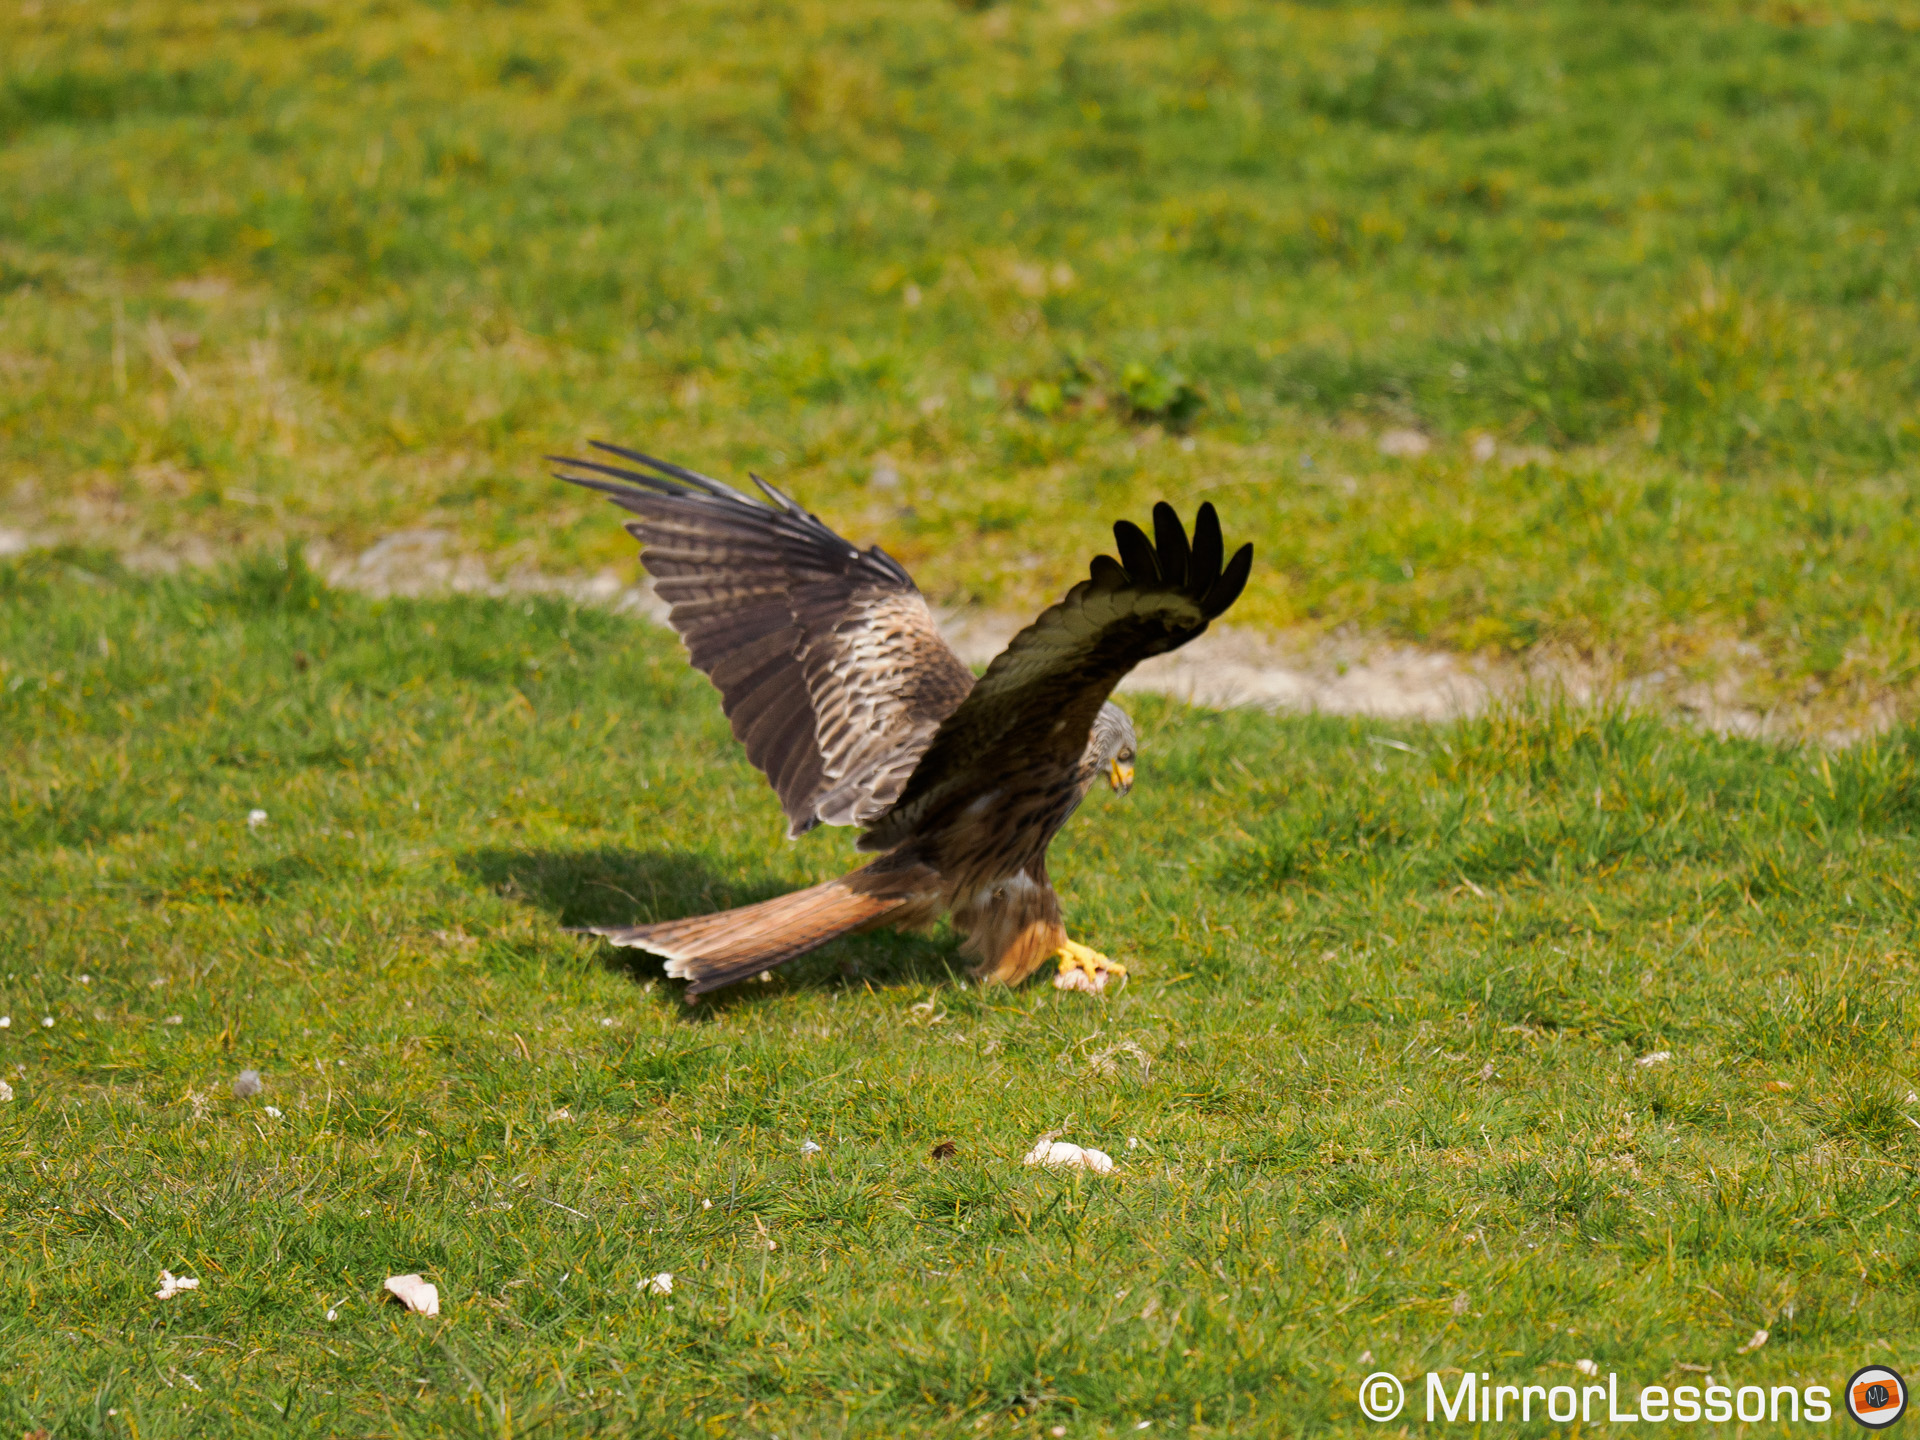 red kite grabbing a piece of meat on the grass. Image is out of focus.